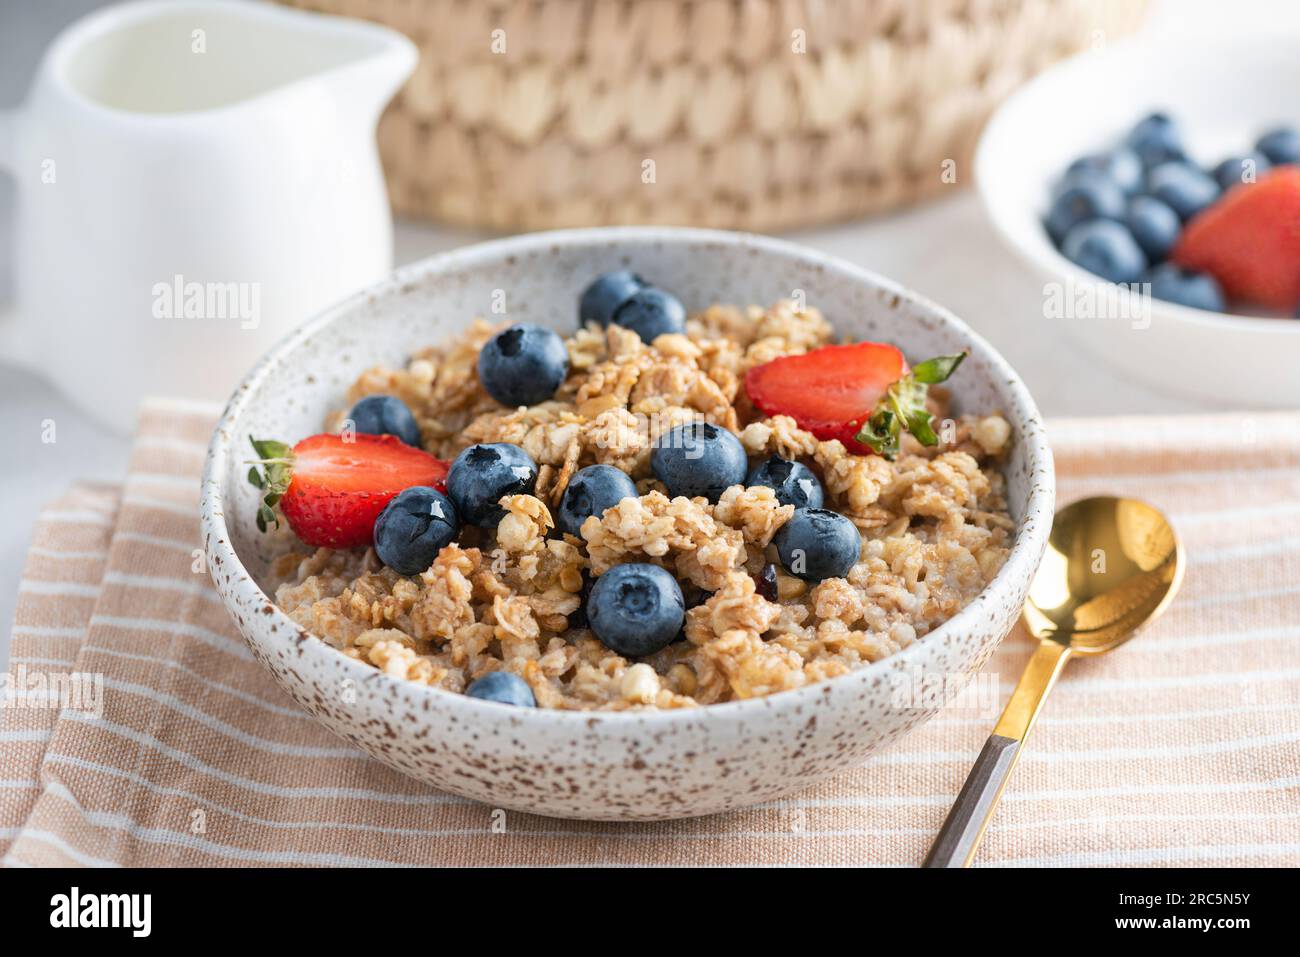 Breakfast oat honey granola soaked in oat milk served with fresh berries, closeup view Stock Photo